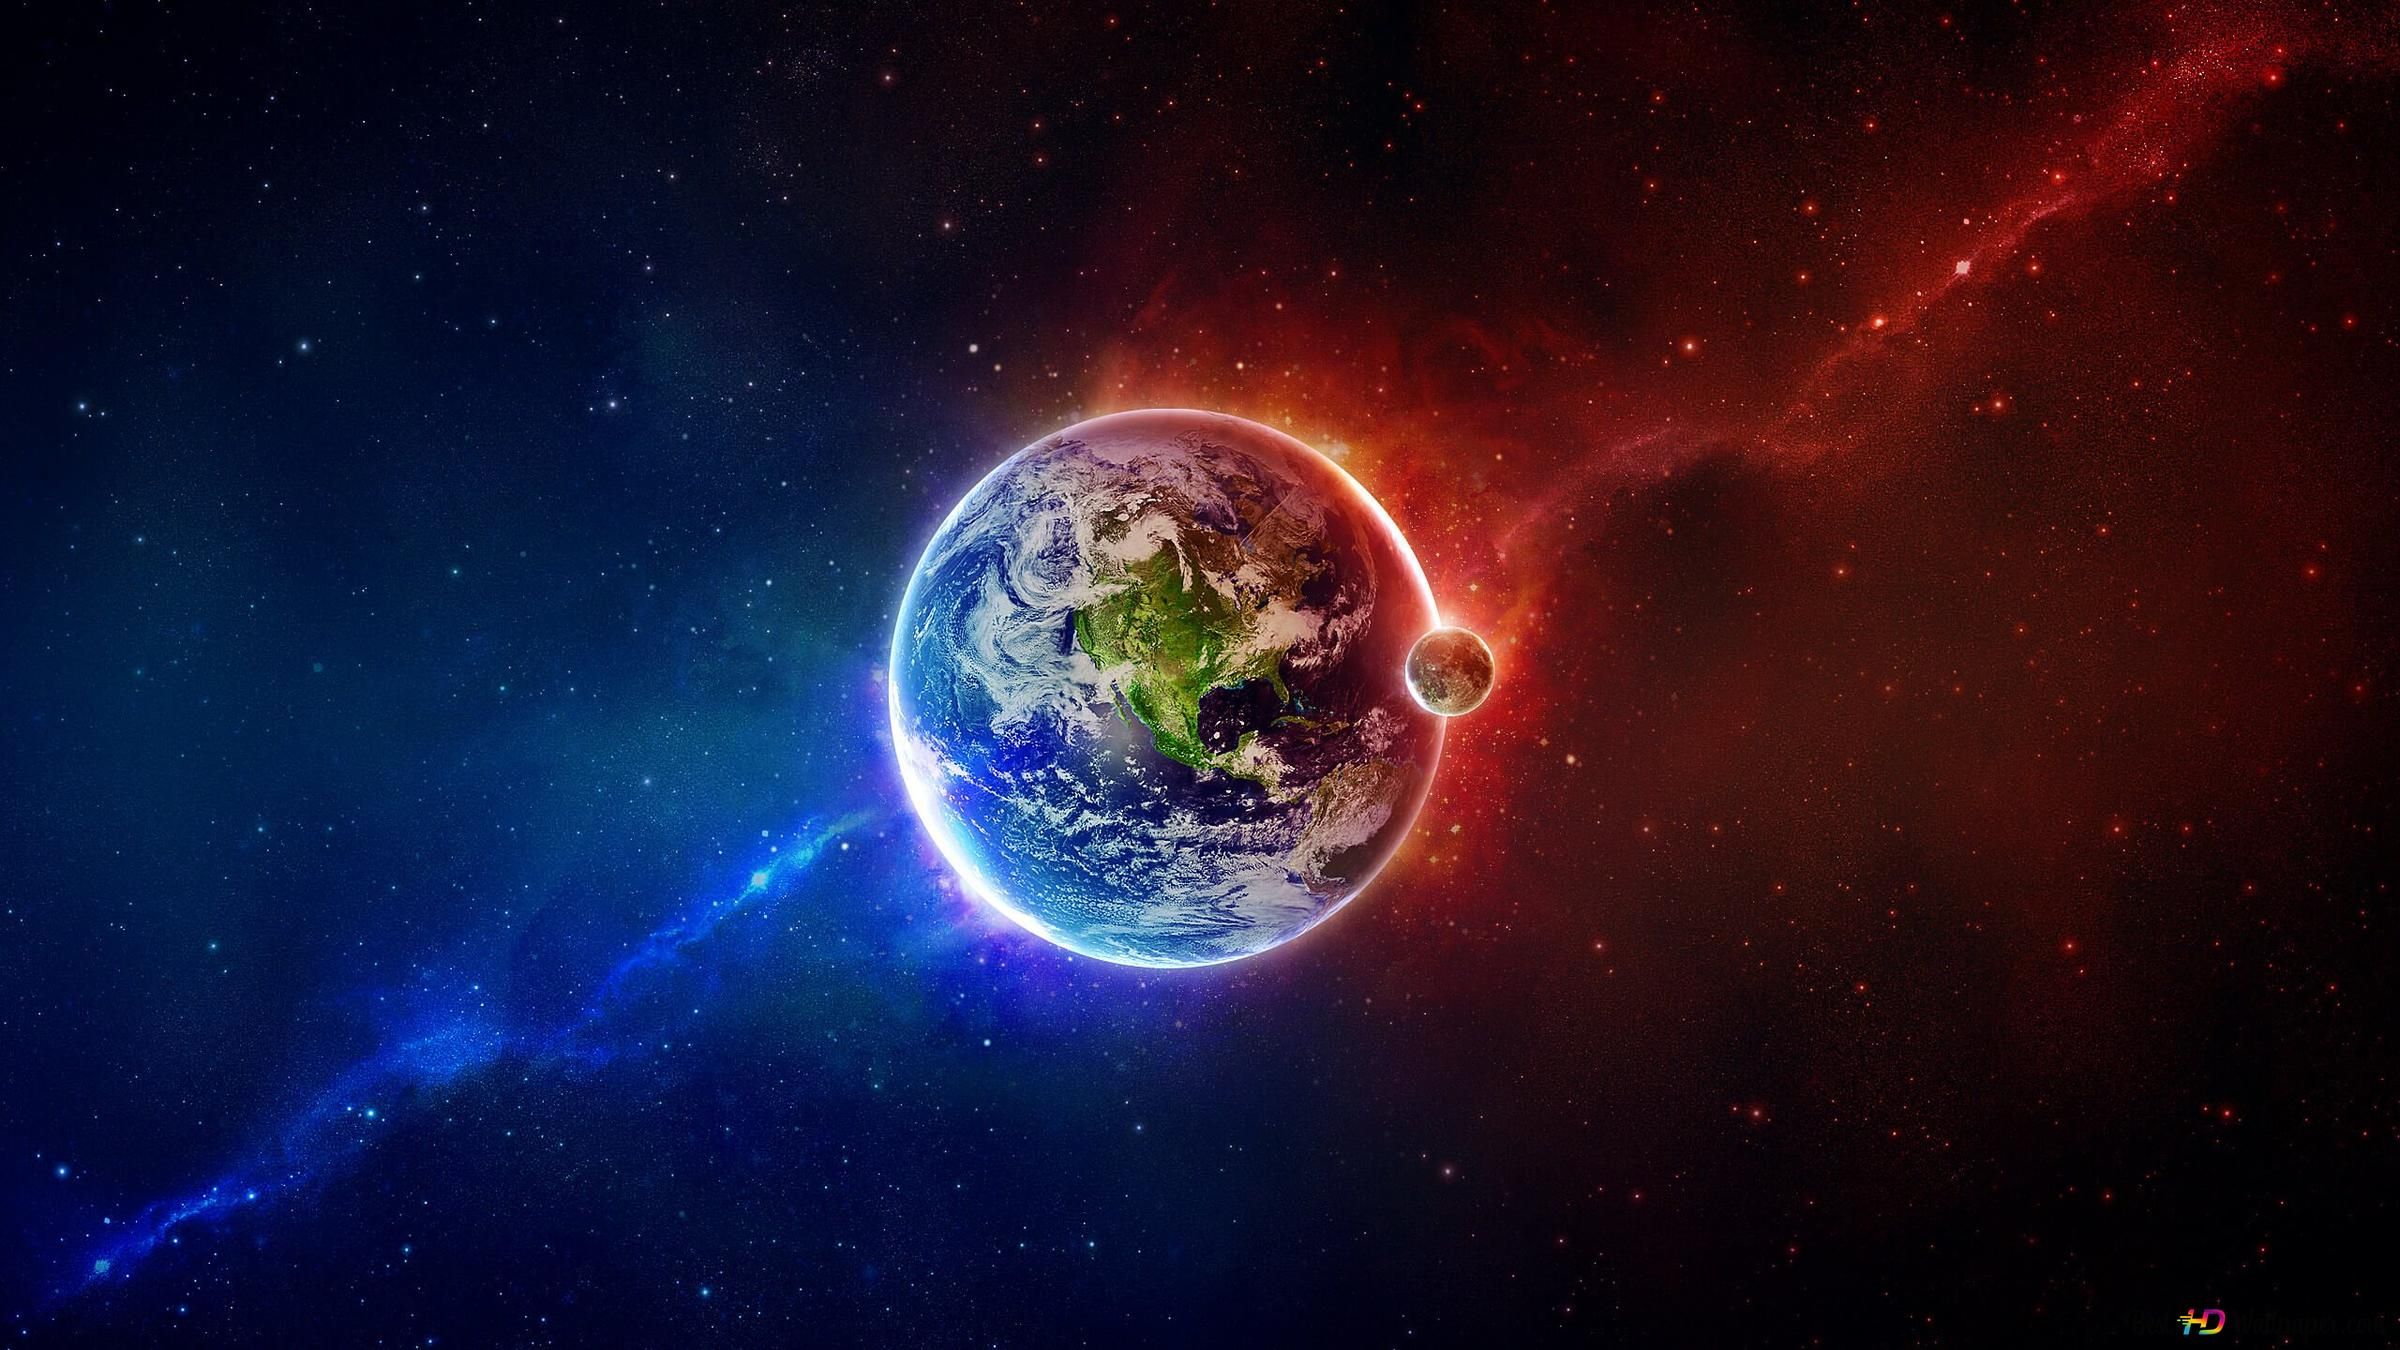 The earth and the moon in space wallpaper 1920x1200 - Earth